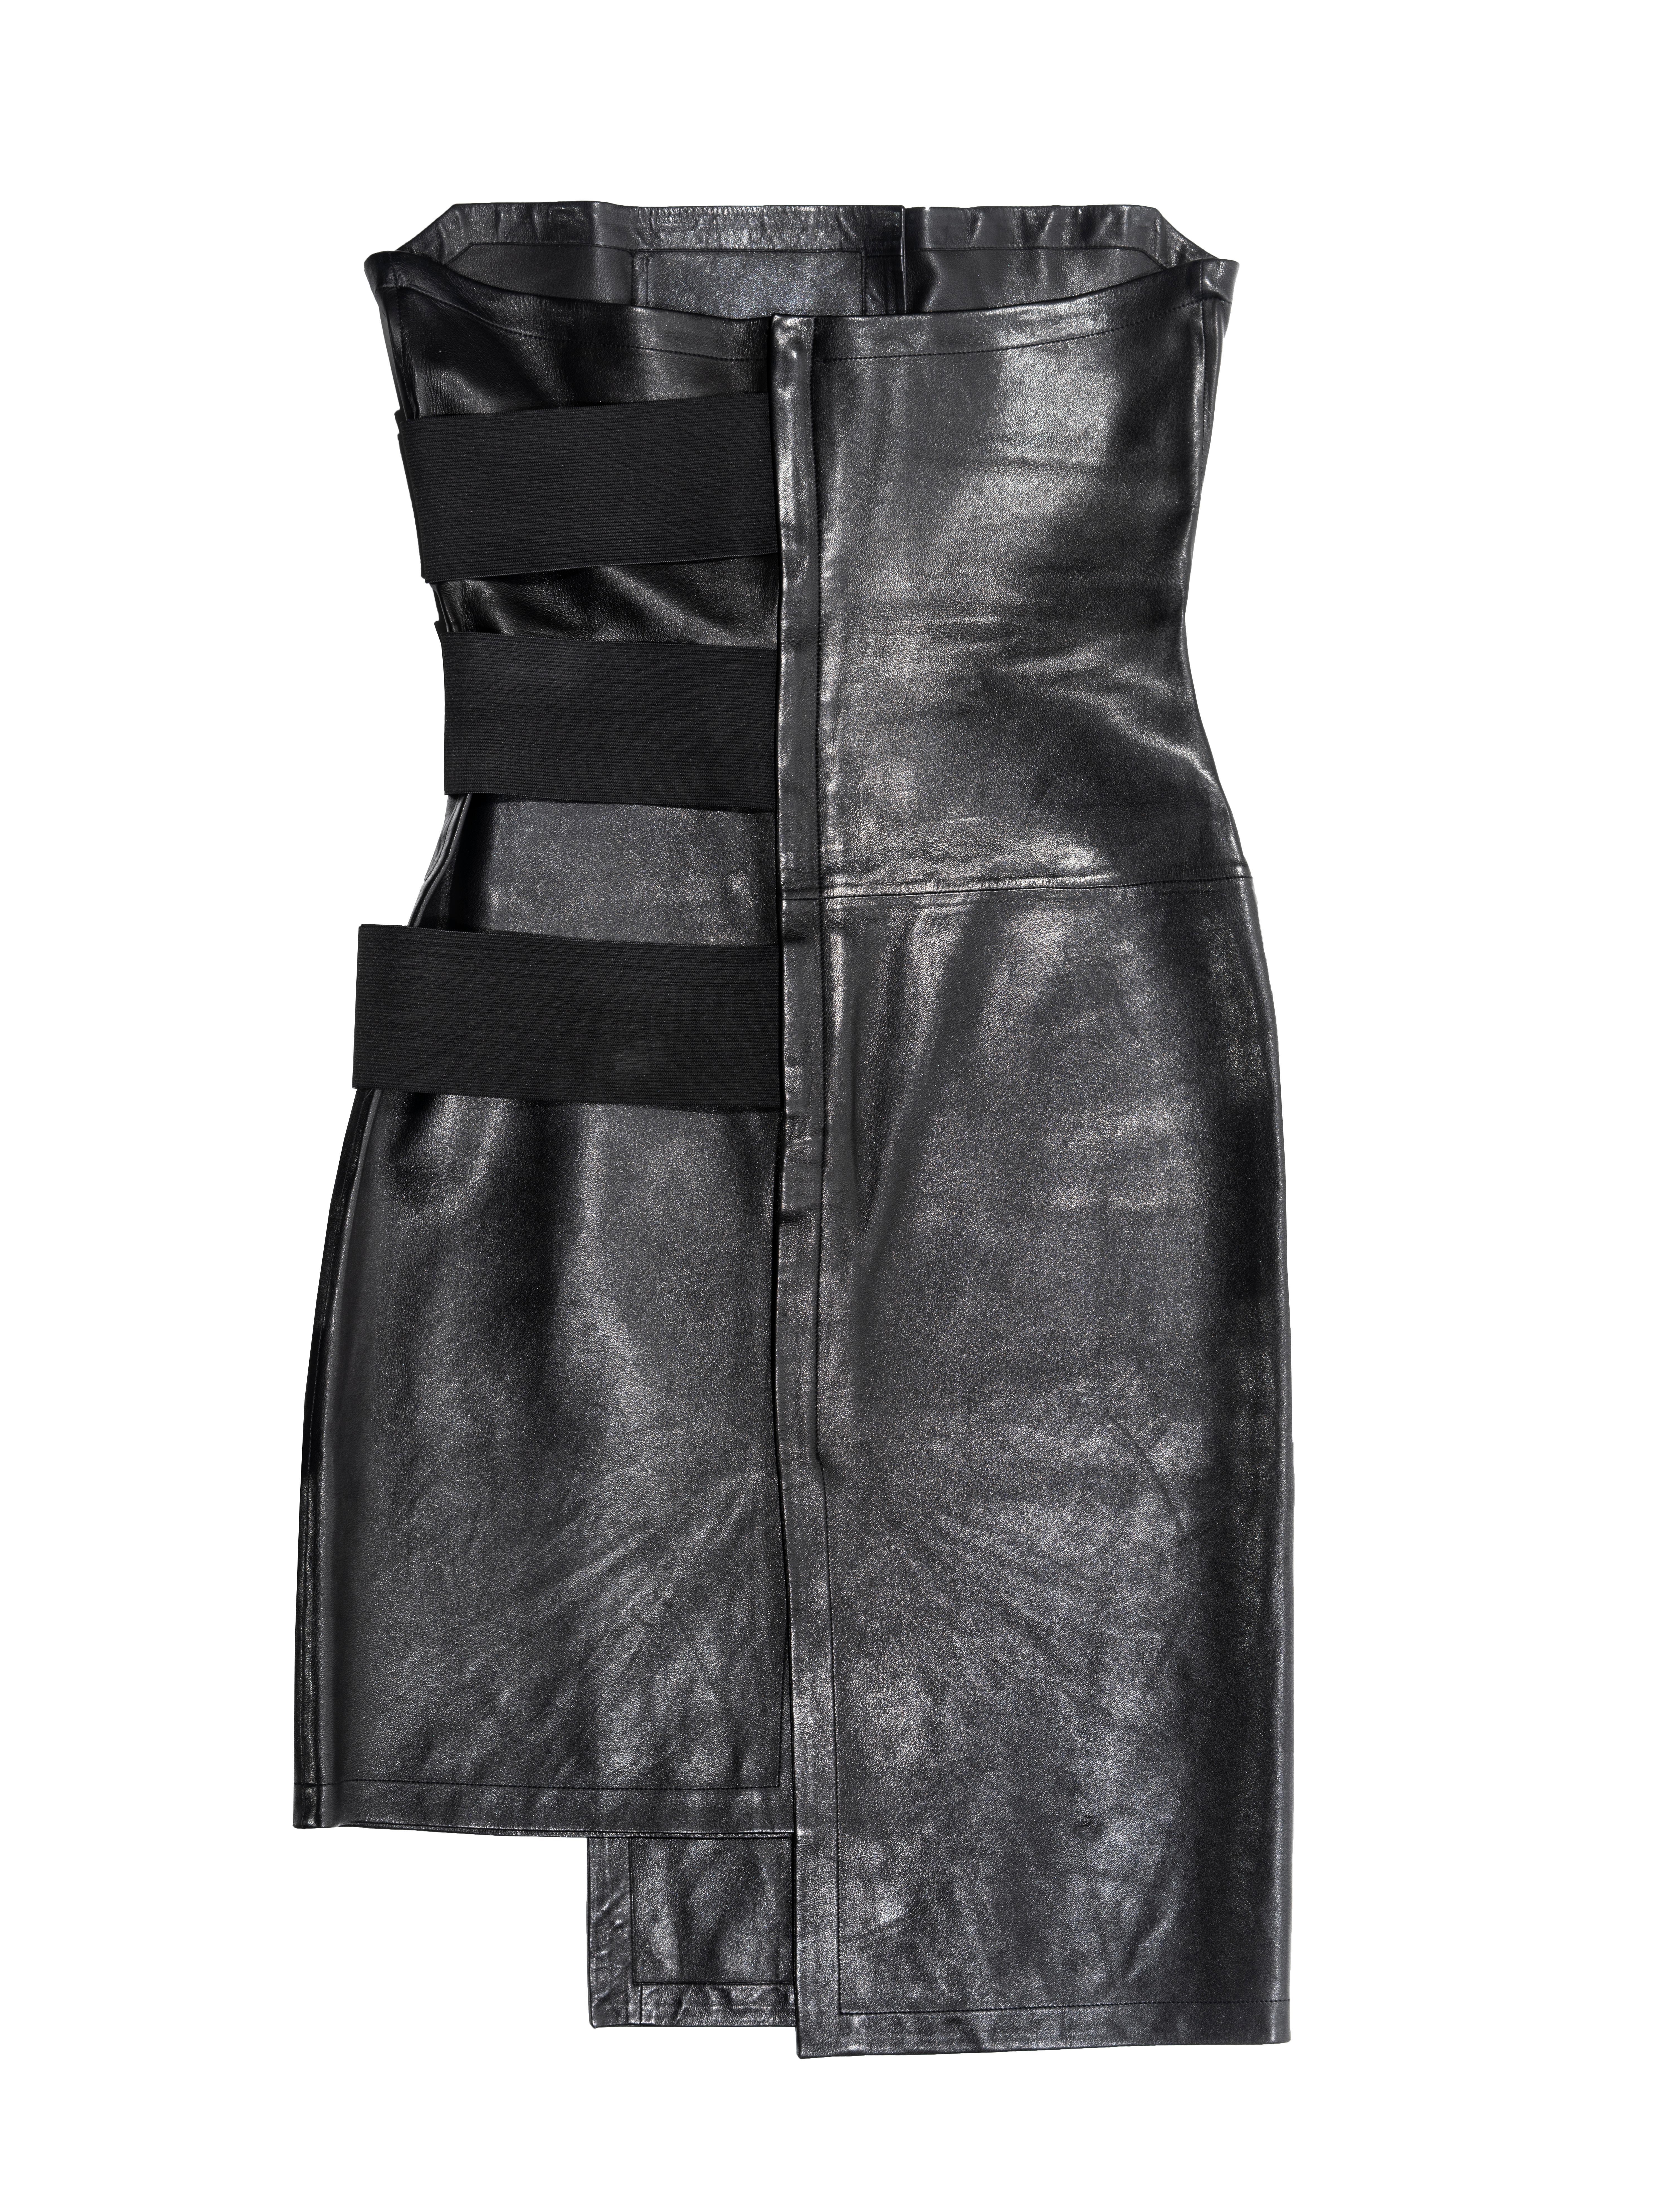 Yves Saint Laurent by Tom Ford black leather strapless wrap dress, ss 2001 4